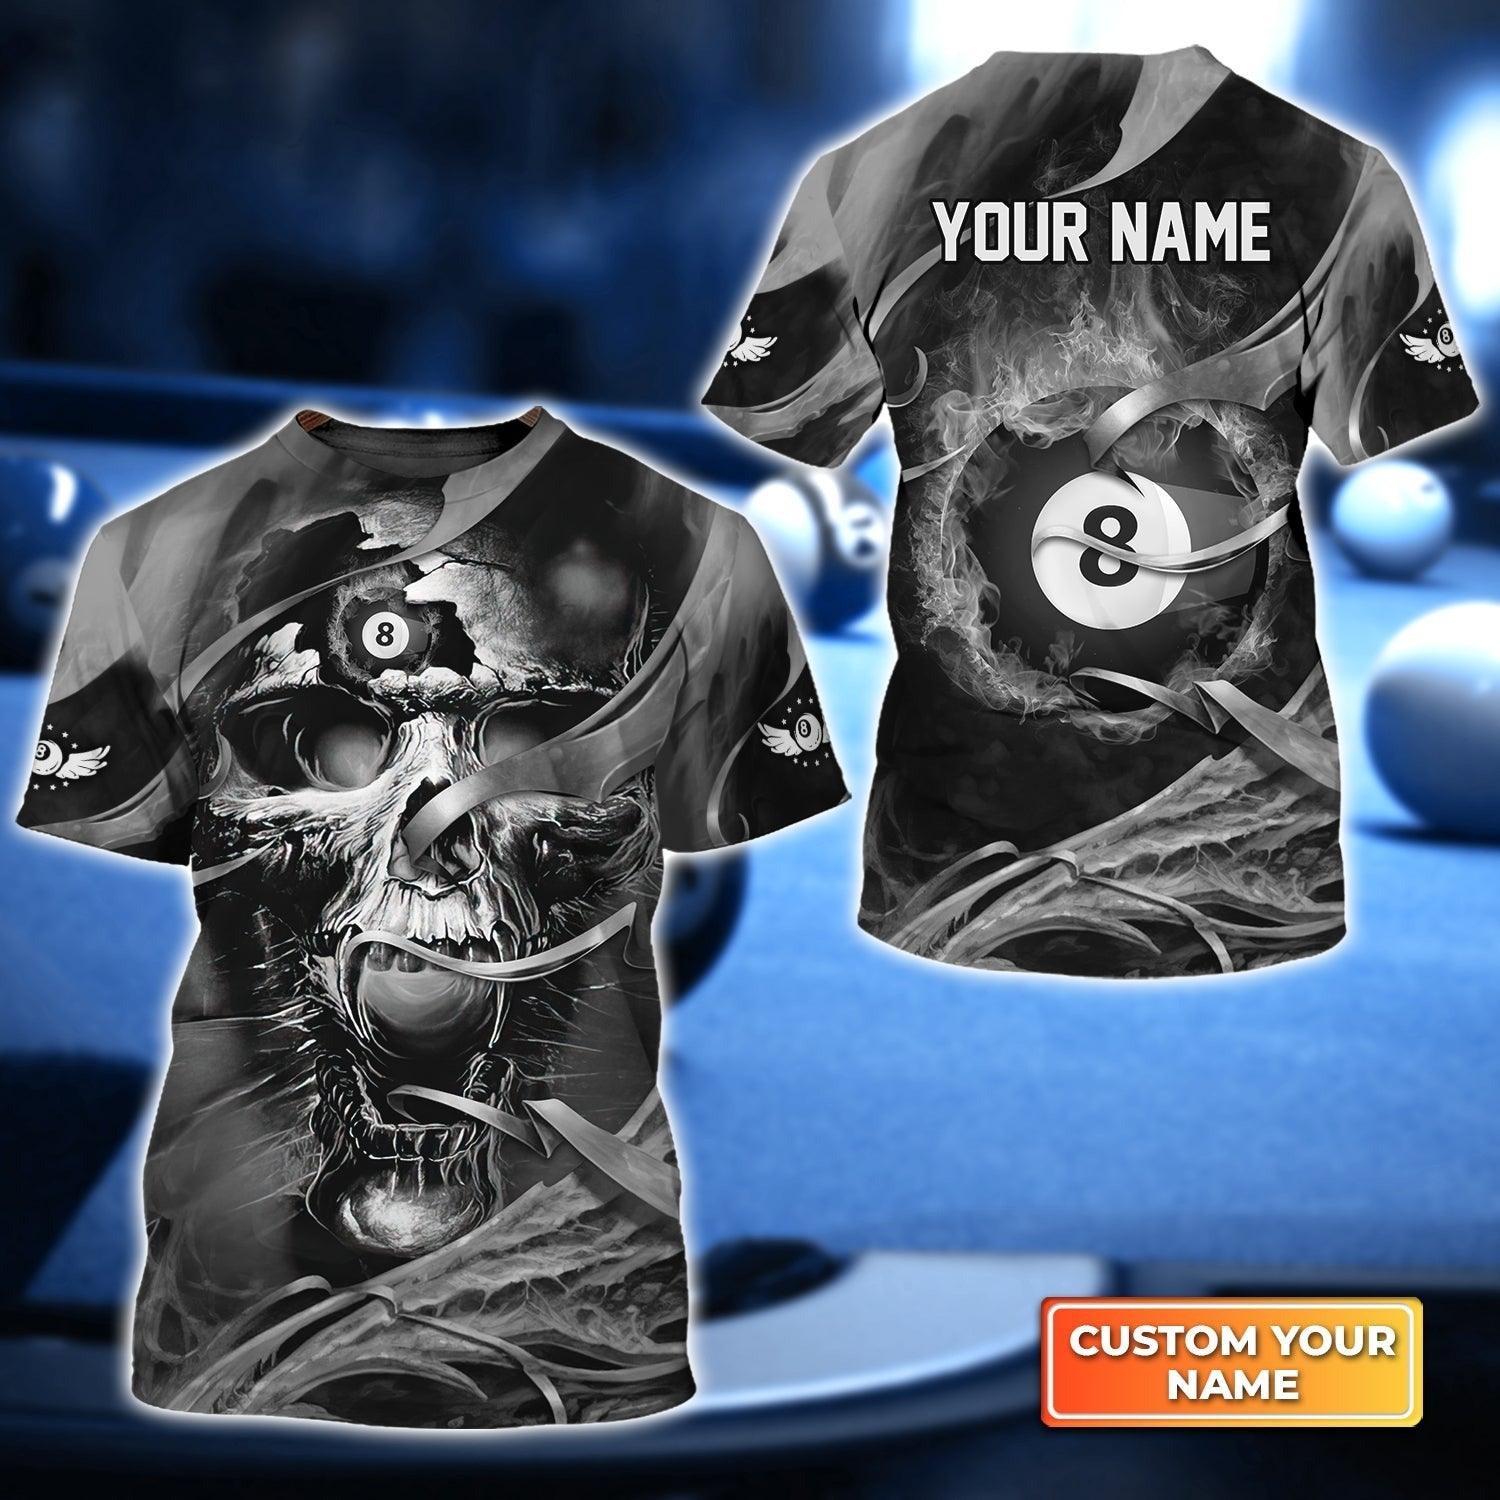 Customized Name Billiard T Shirt, Black And White Skull With 8-Ball Billiards Game T Shirt For Men - Gift For Billiard Lovers, Billiard Players - Amzanimalsgift